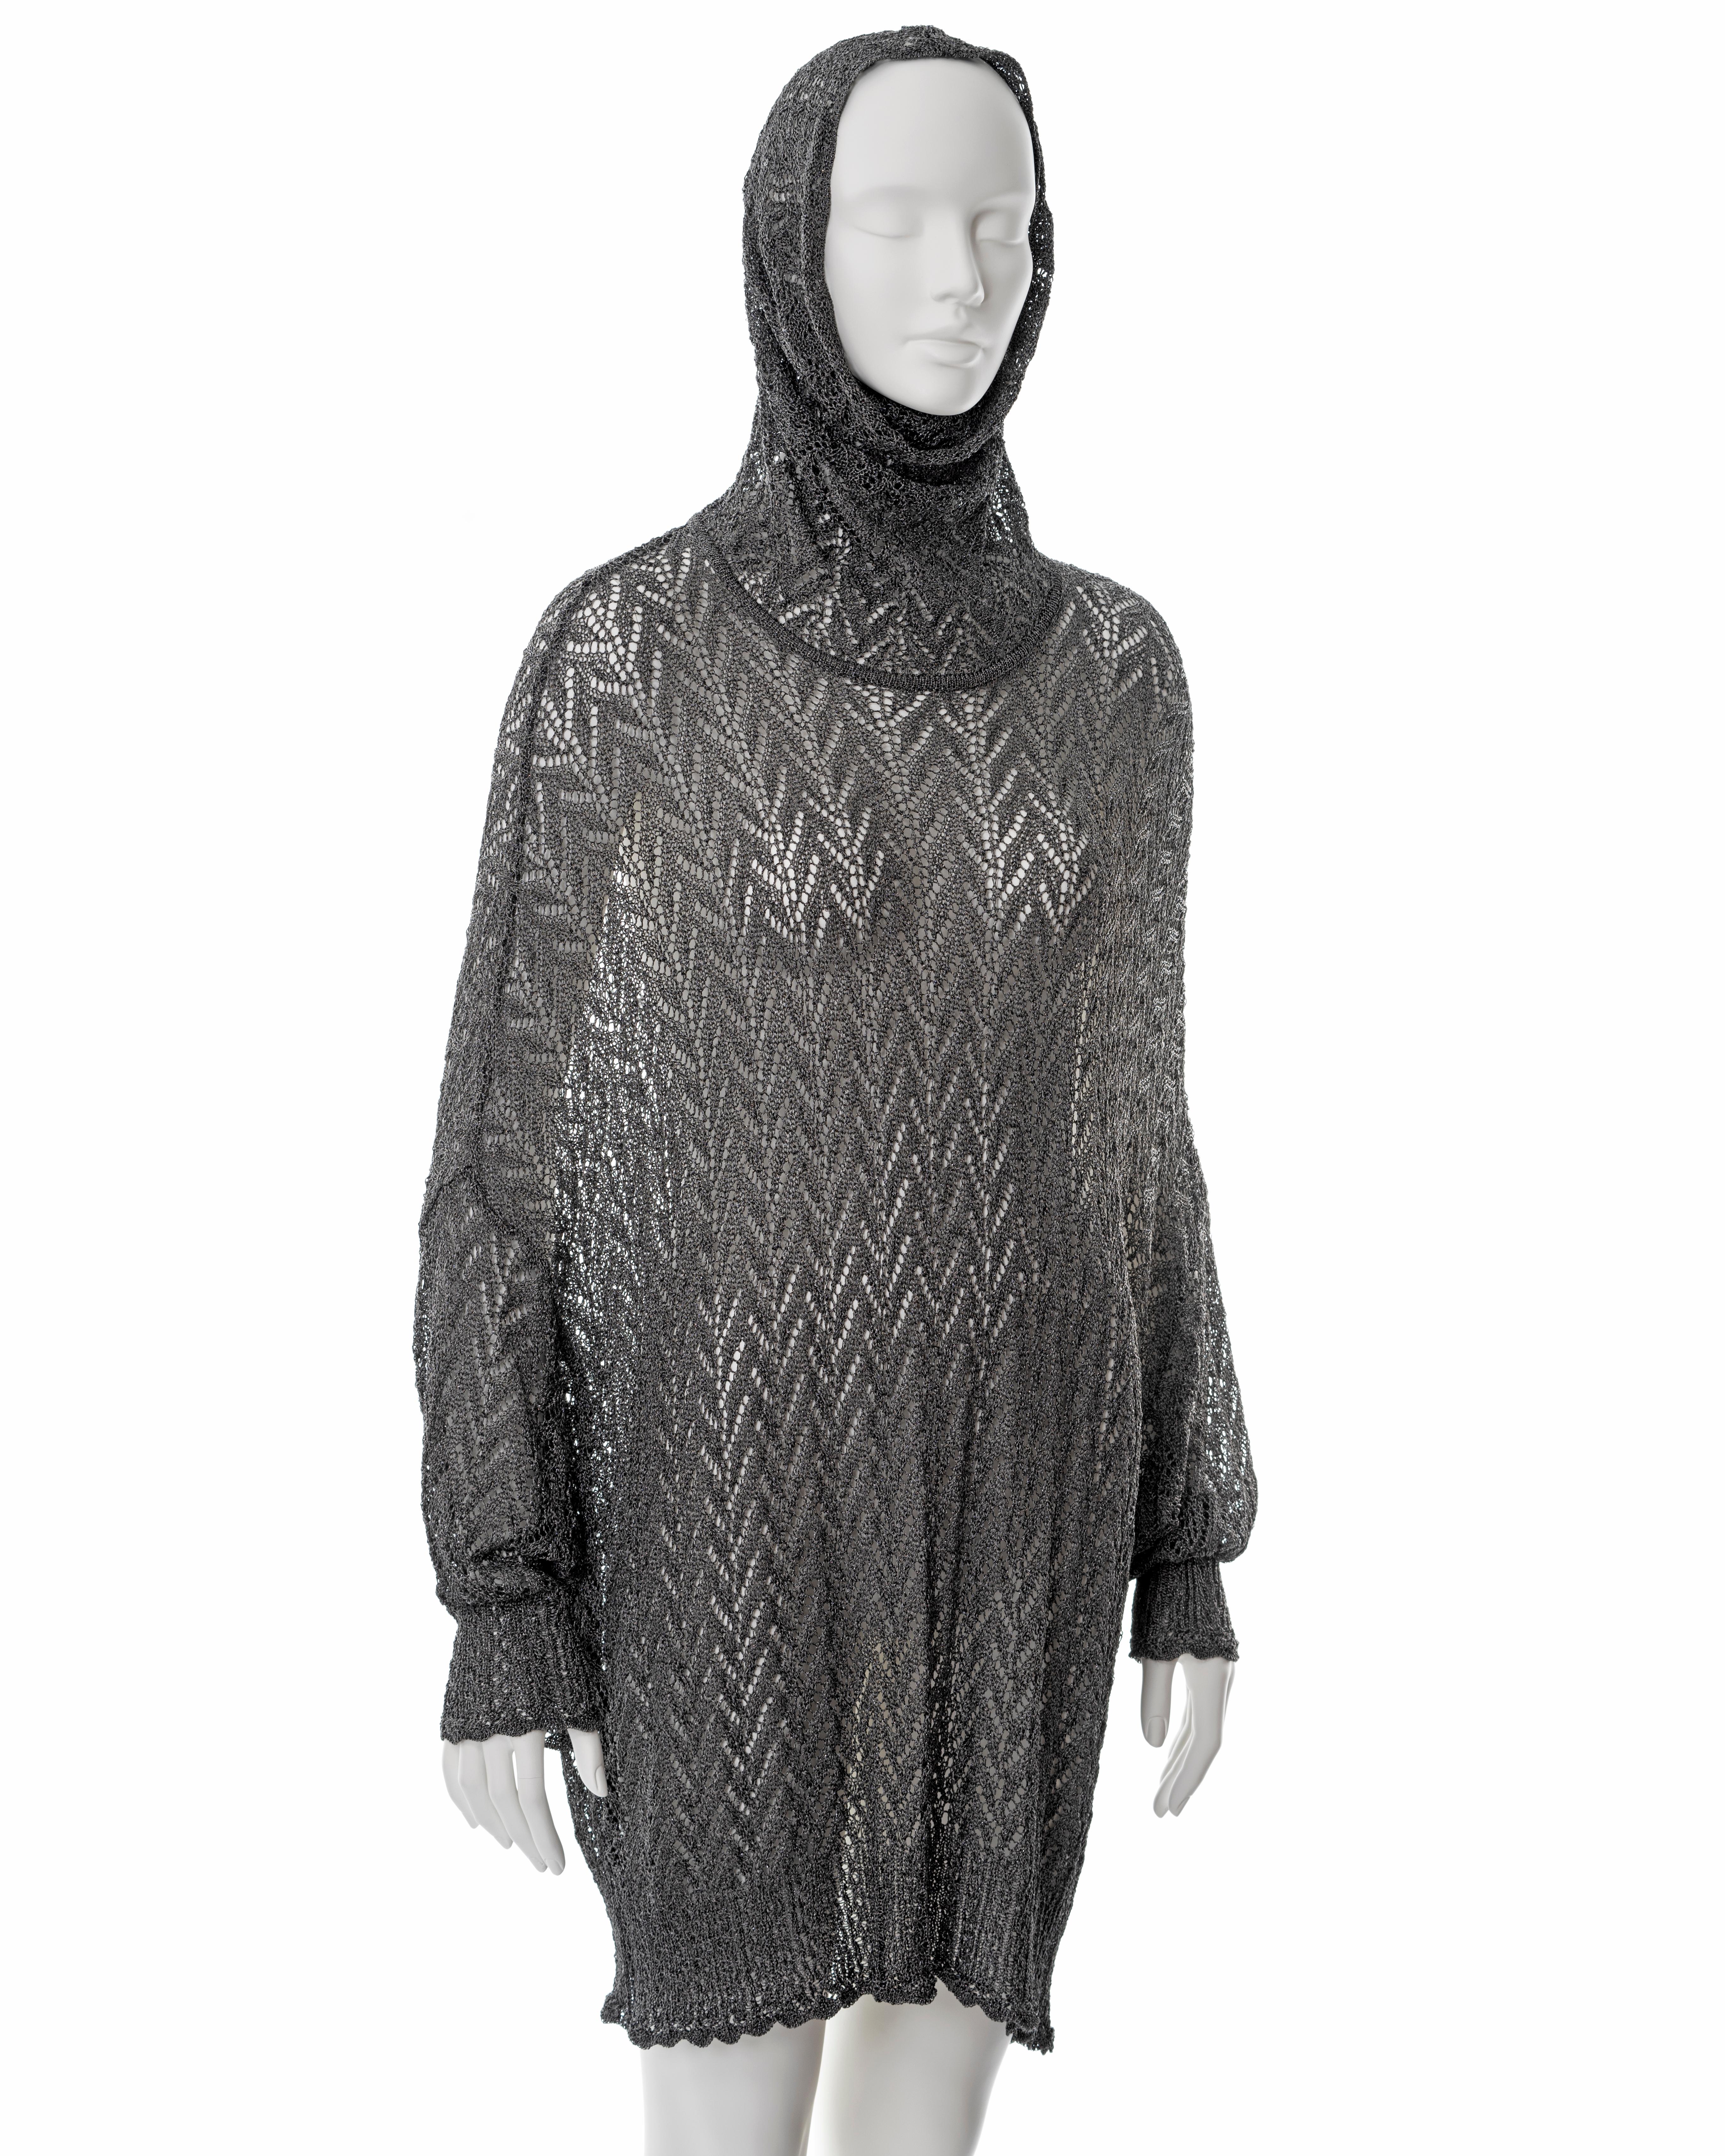 Christian Dior by John Galliano silver crochet sweater dress, fw 1998 For Sale 1